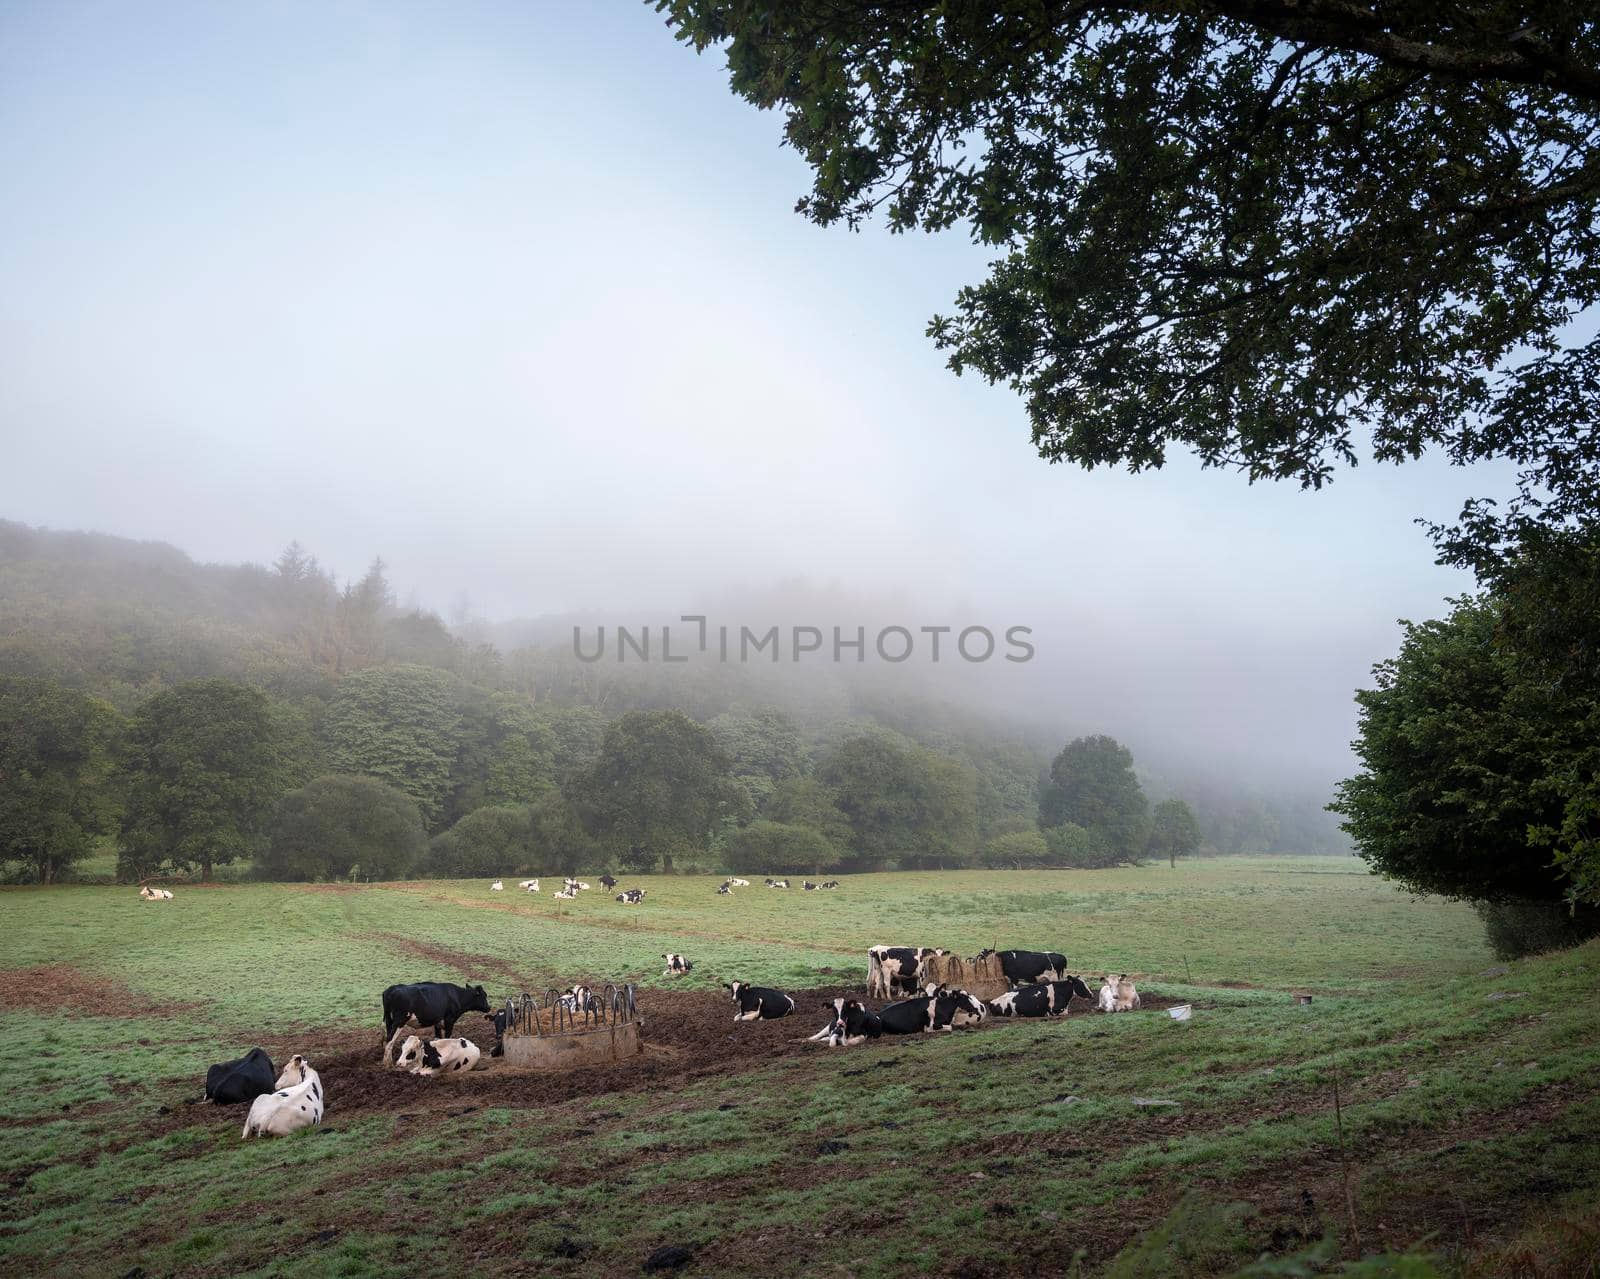 black and white cows on foggy early morning in central brittany near nature park d'armorique in france under blue sky